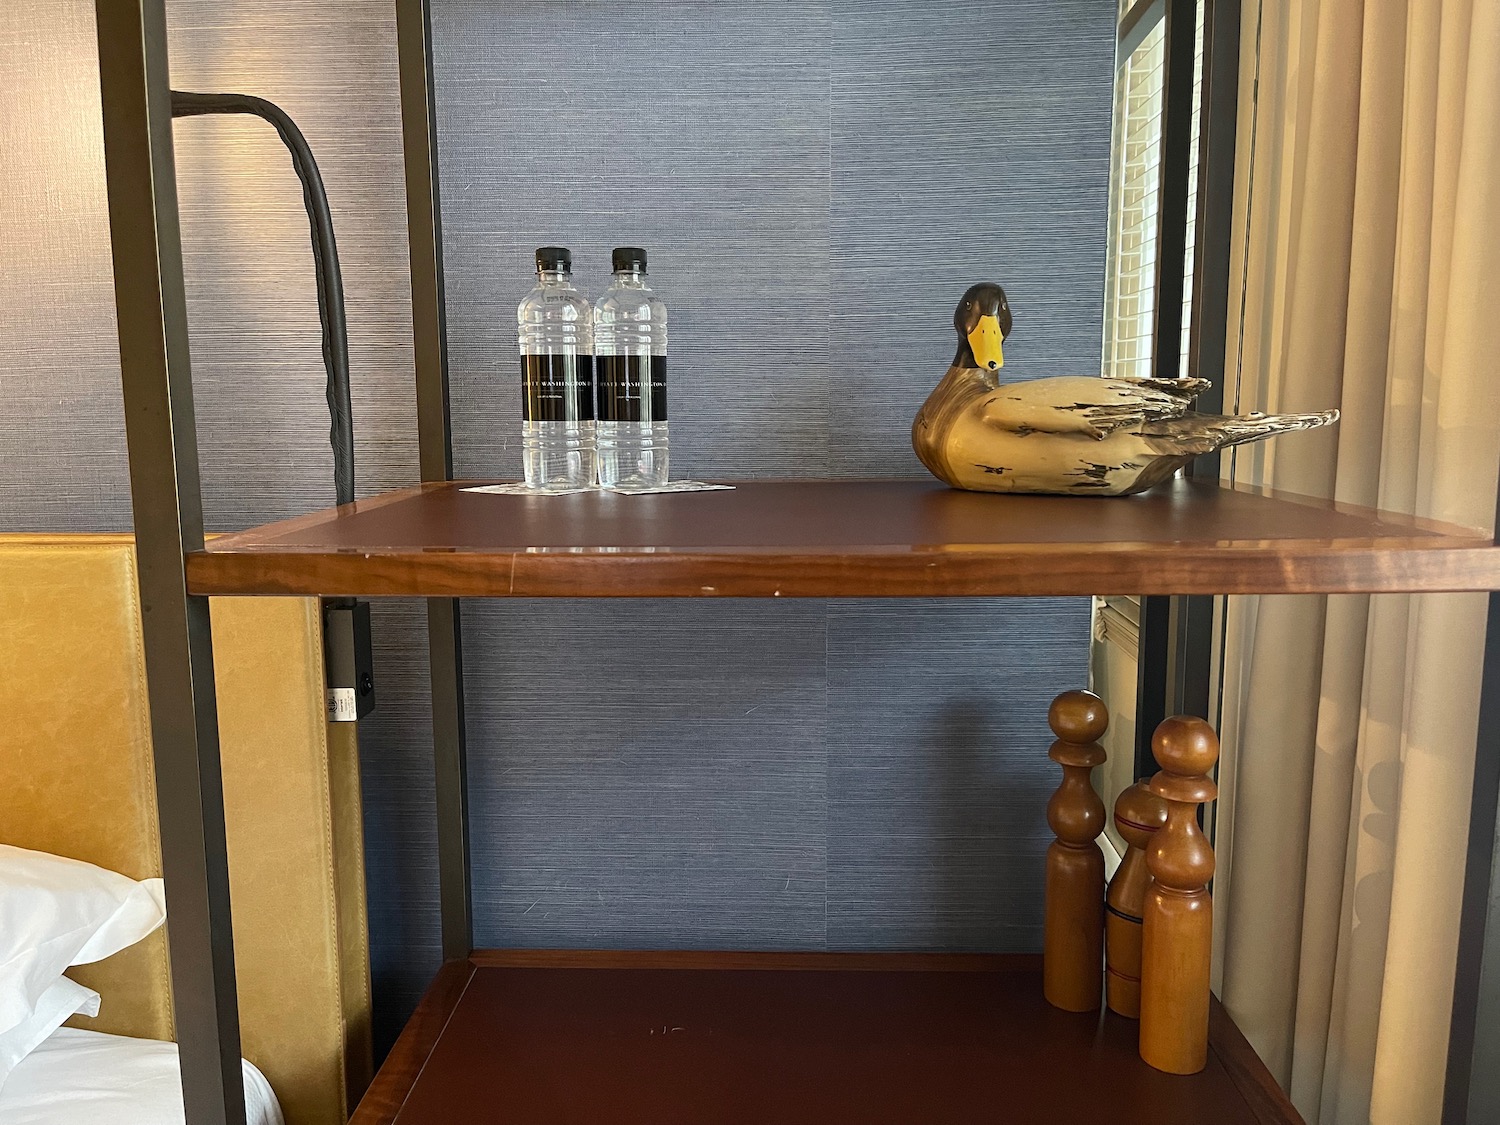 a wooden shelf with a duck statue and bottles on it